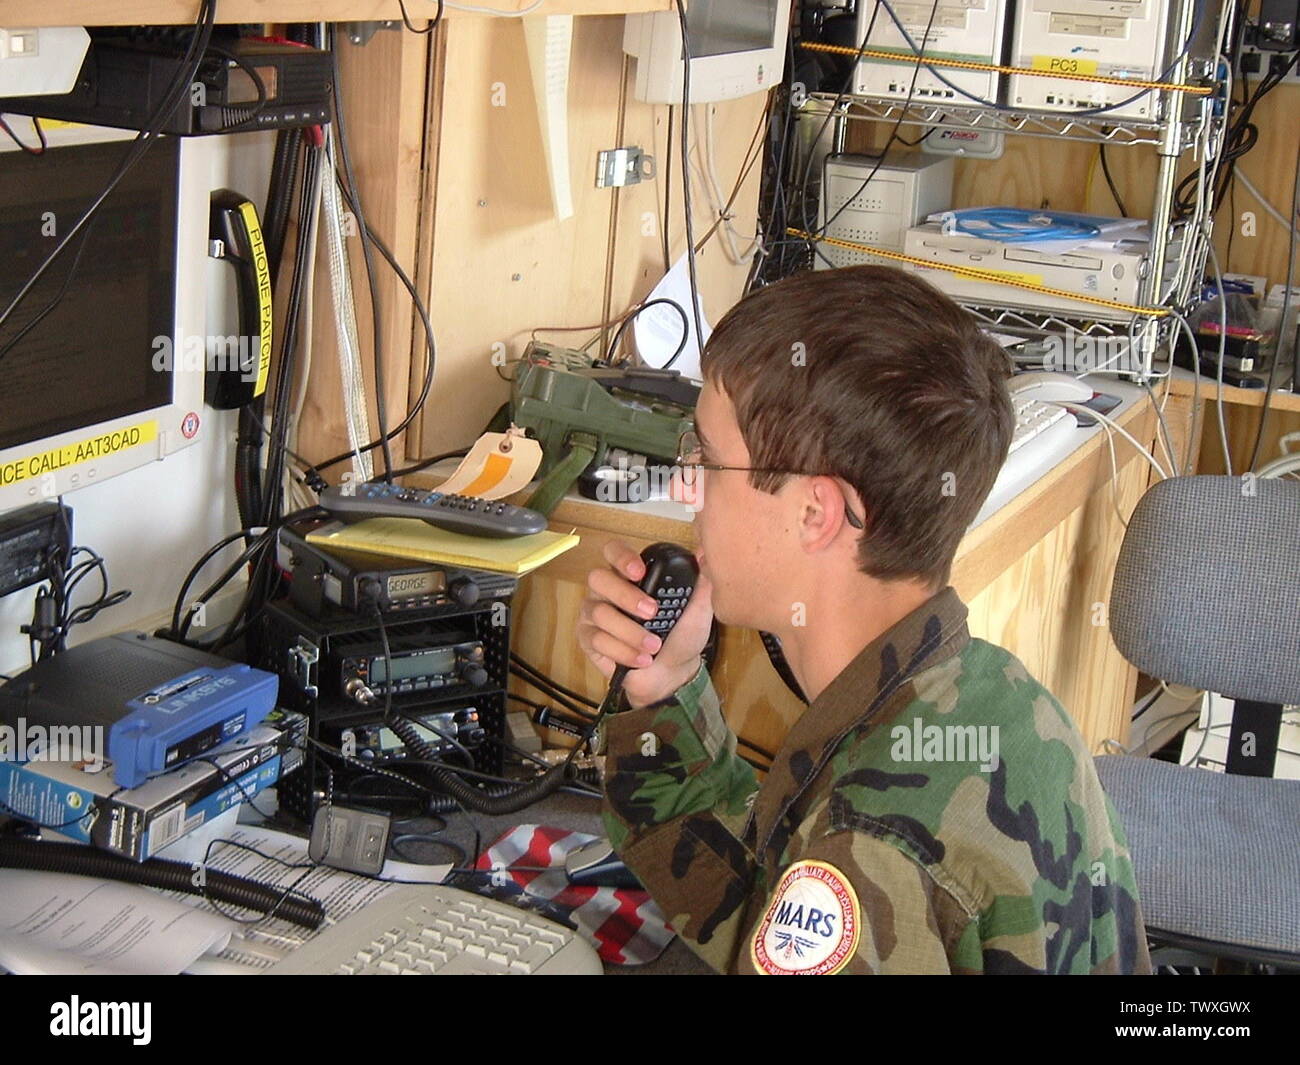 MARS Operator, AAT3OT, using a radio to communicate with the U.S. Army  Reserve in the MARS Emergency Communications Unit trailer.; 22 August 2005 ( original upload date); Transferred from en.pedia to Commons.; KB3JUV